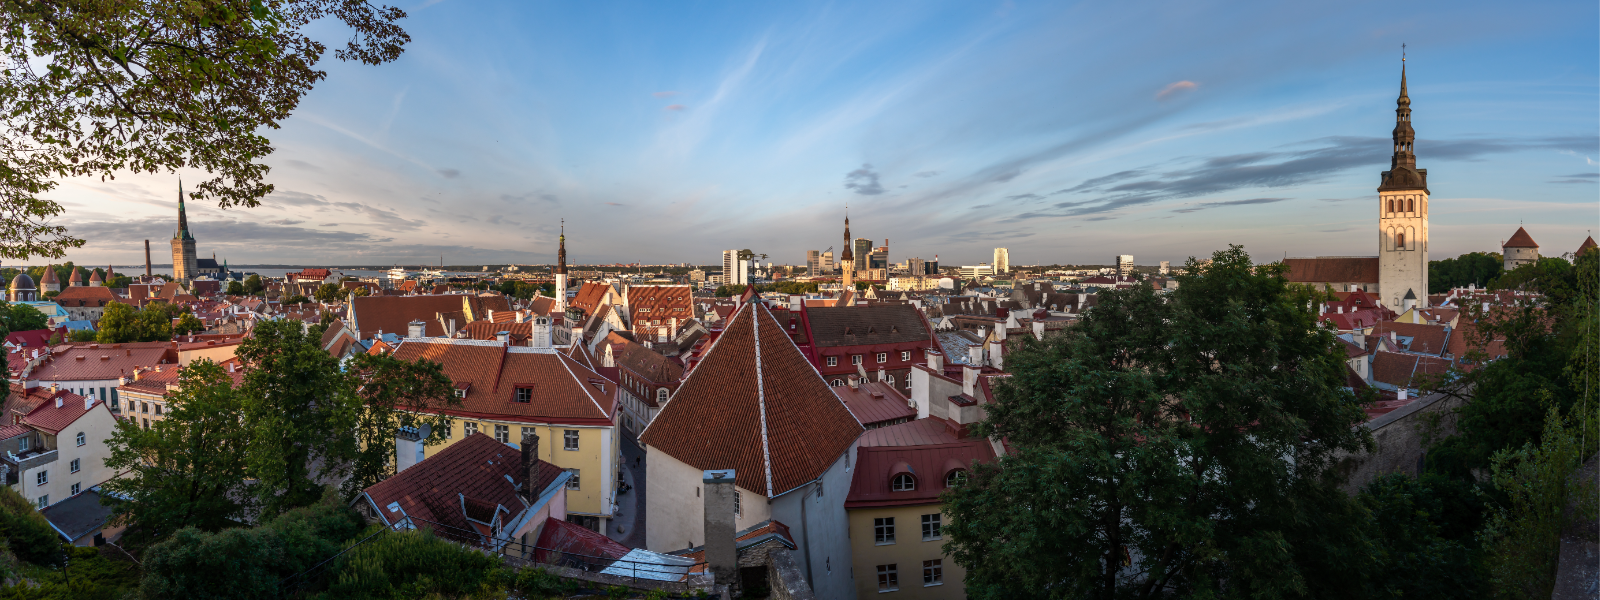 Other travel-related reservation services, including the activities of tour guides, ticket agencies and tourist information points in Tallinn